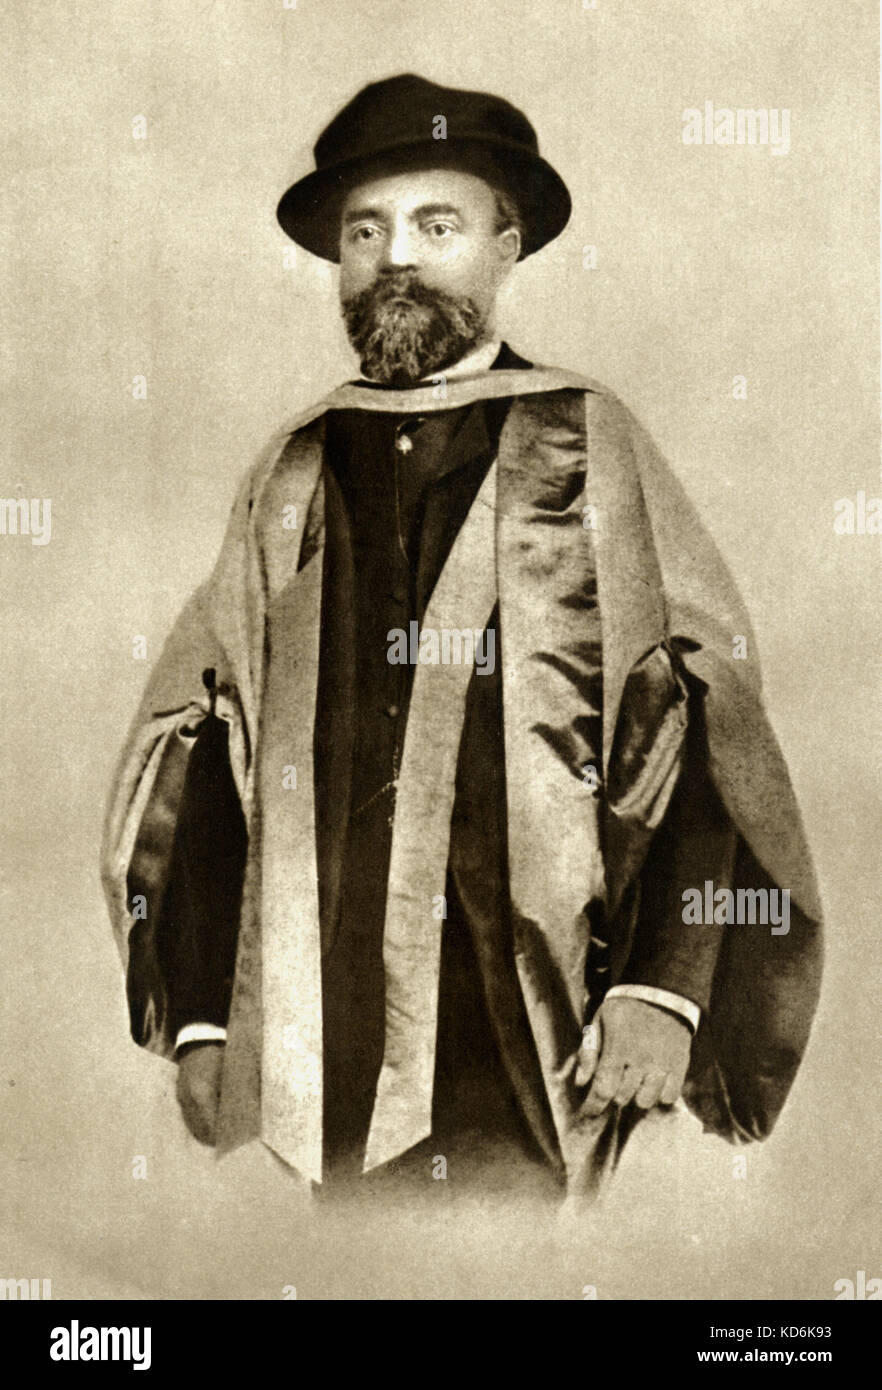 Dvorak on the day he received an honorary doctor's degree from Cambridge University, June 16th 1891.  Czech composer (1841-1904). Stock Photo